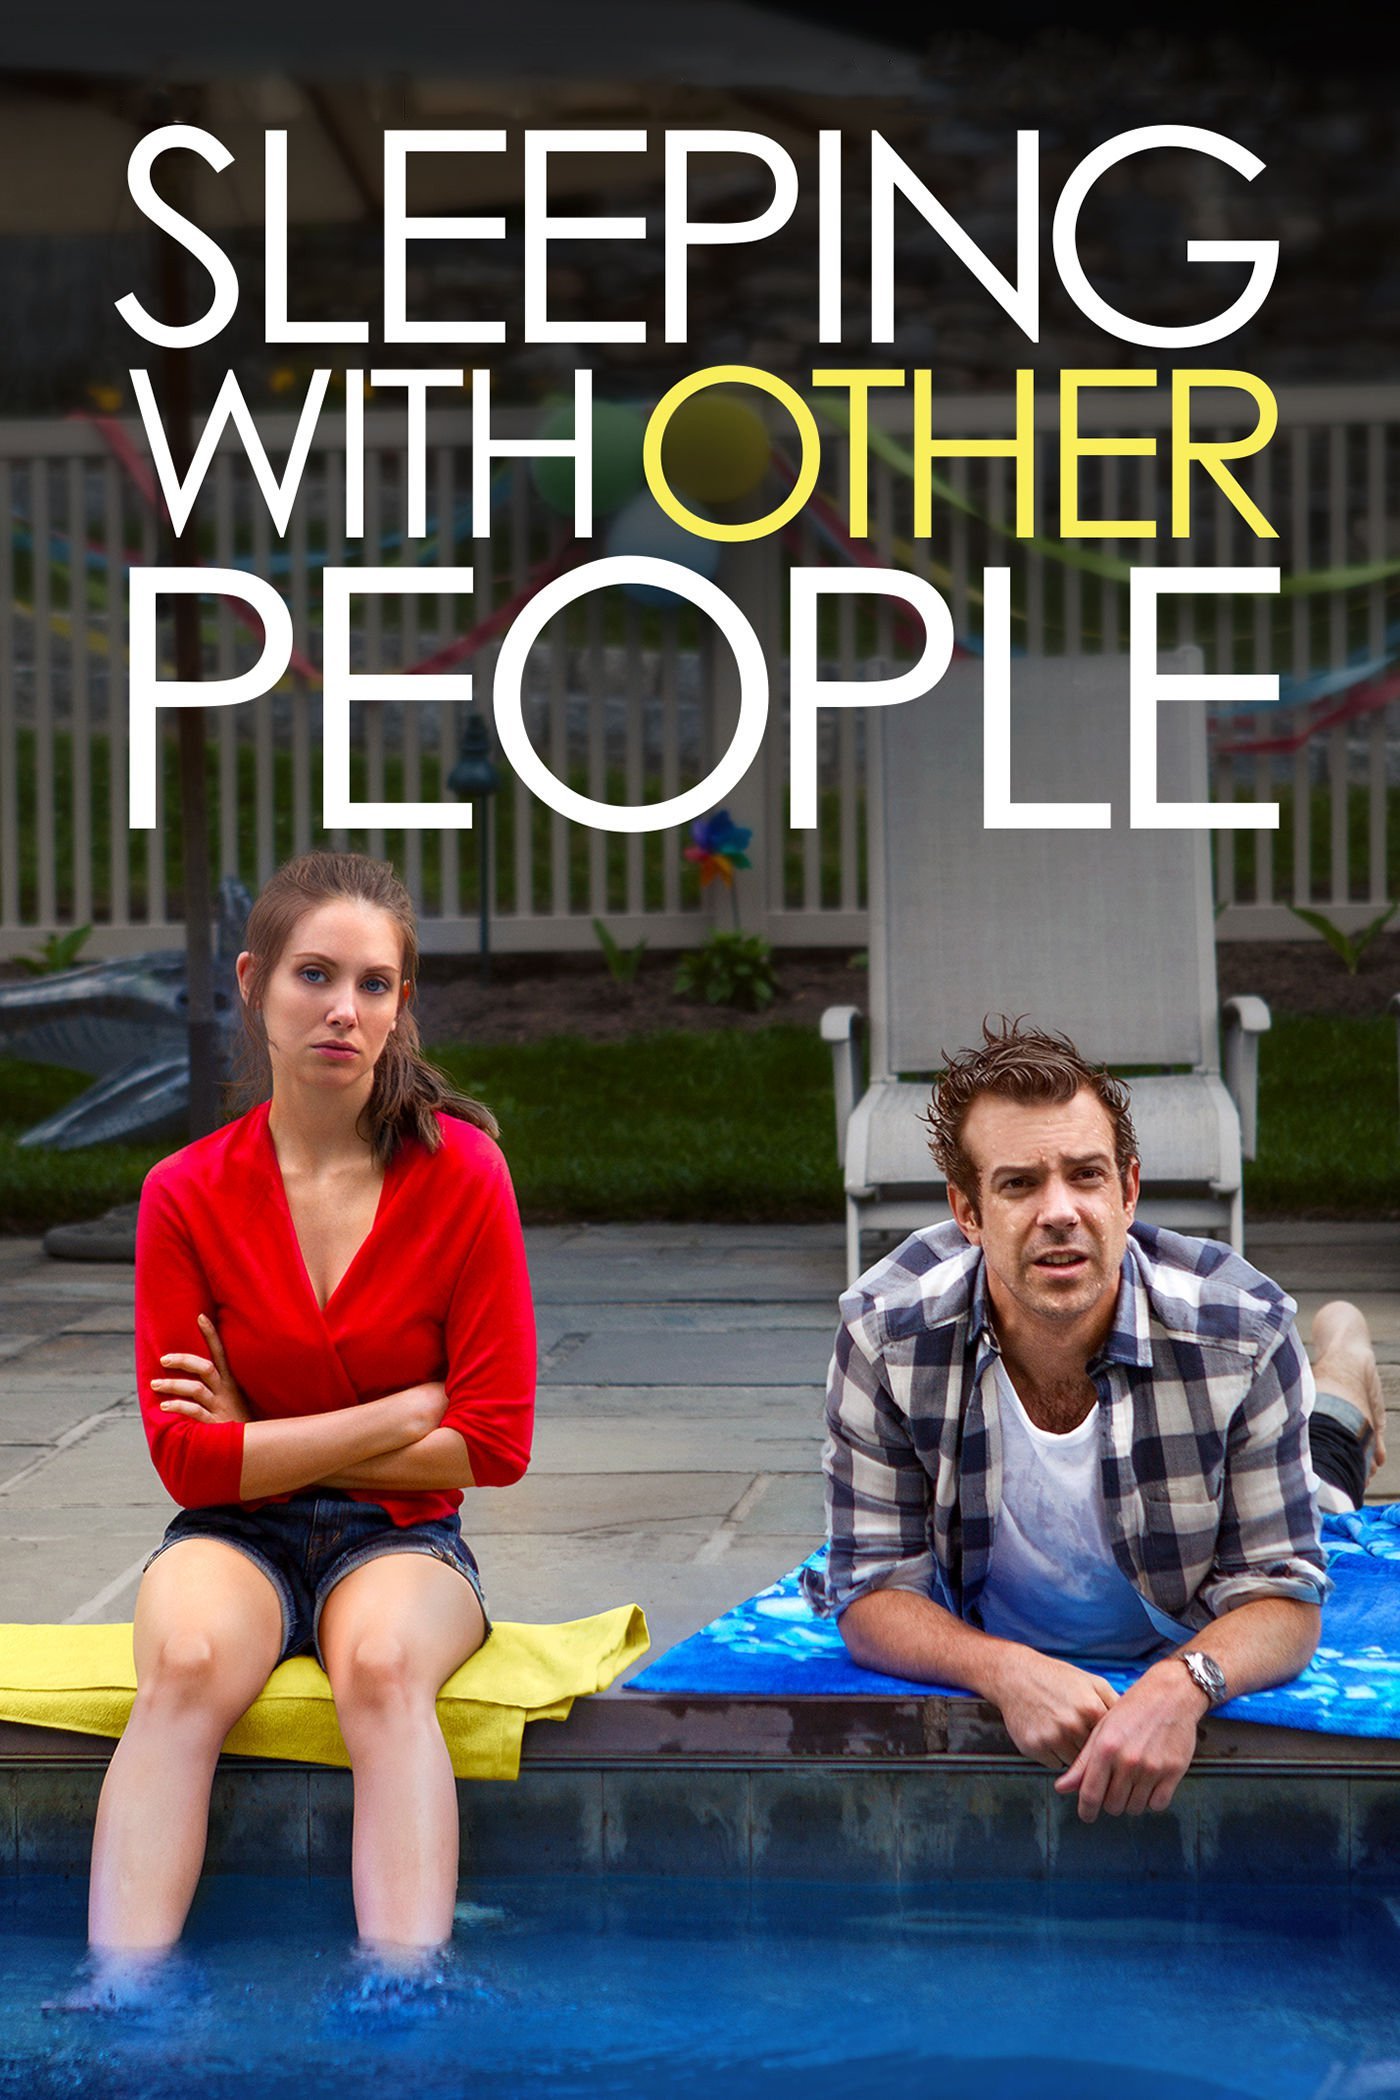 Poster for the filmen "Sleeping with Other People"